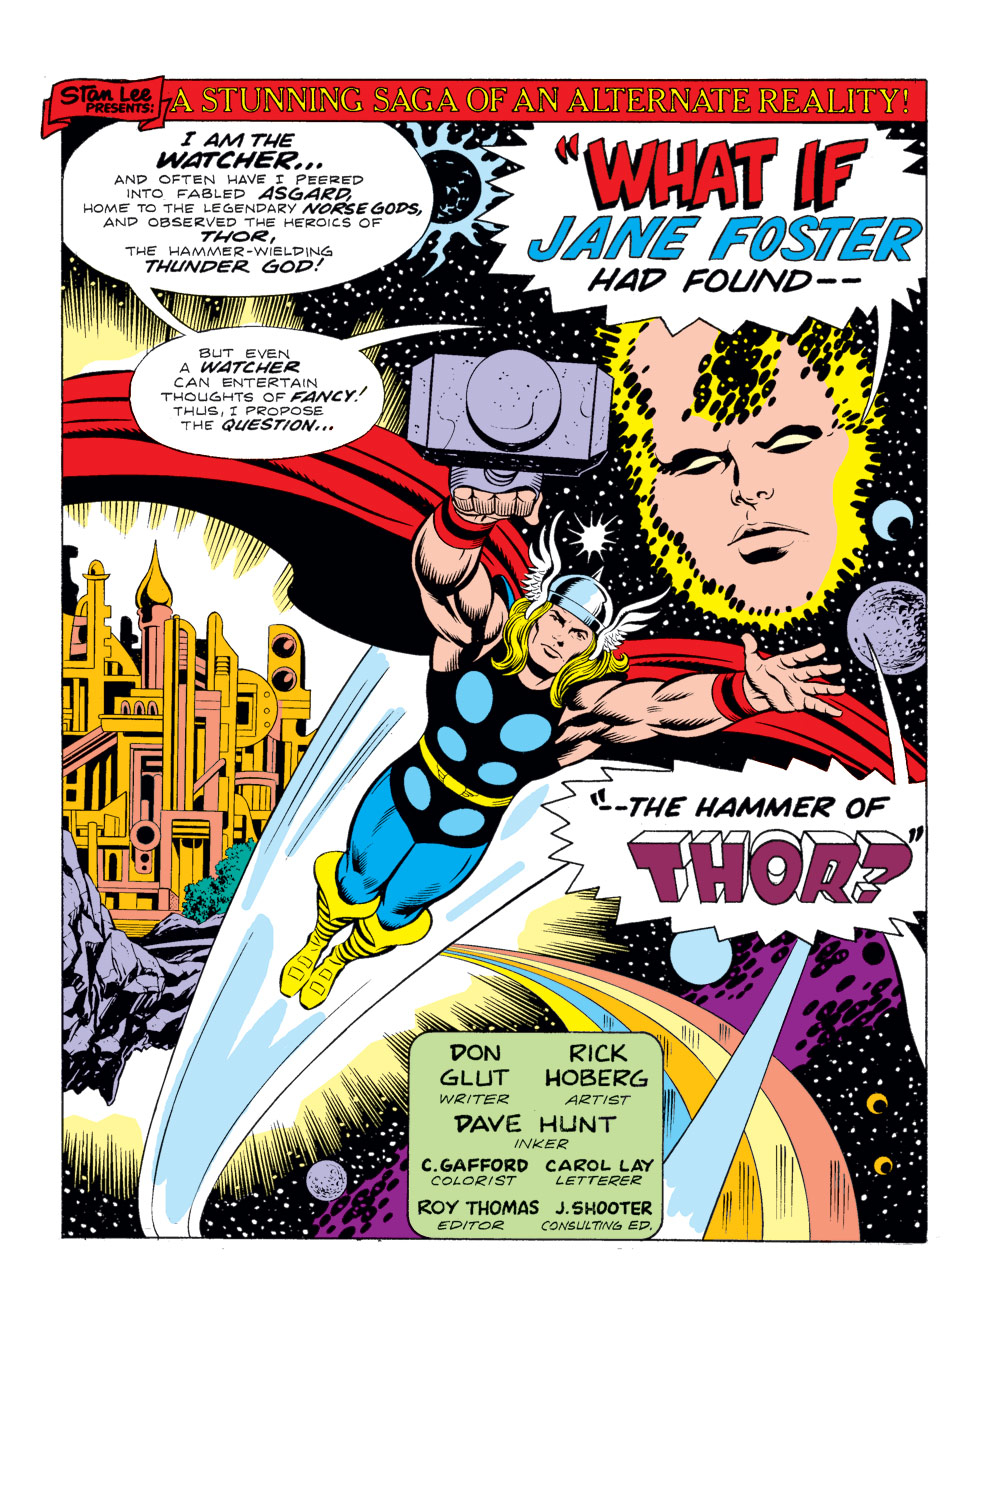 What If? (1977) Issue #10 - Jane Foster had found the hammer of Thor #10 - English 2